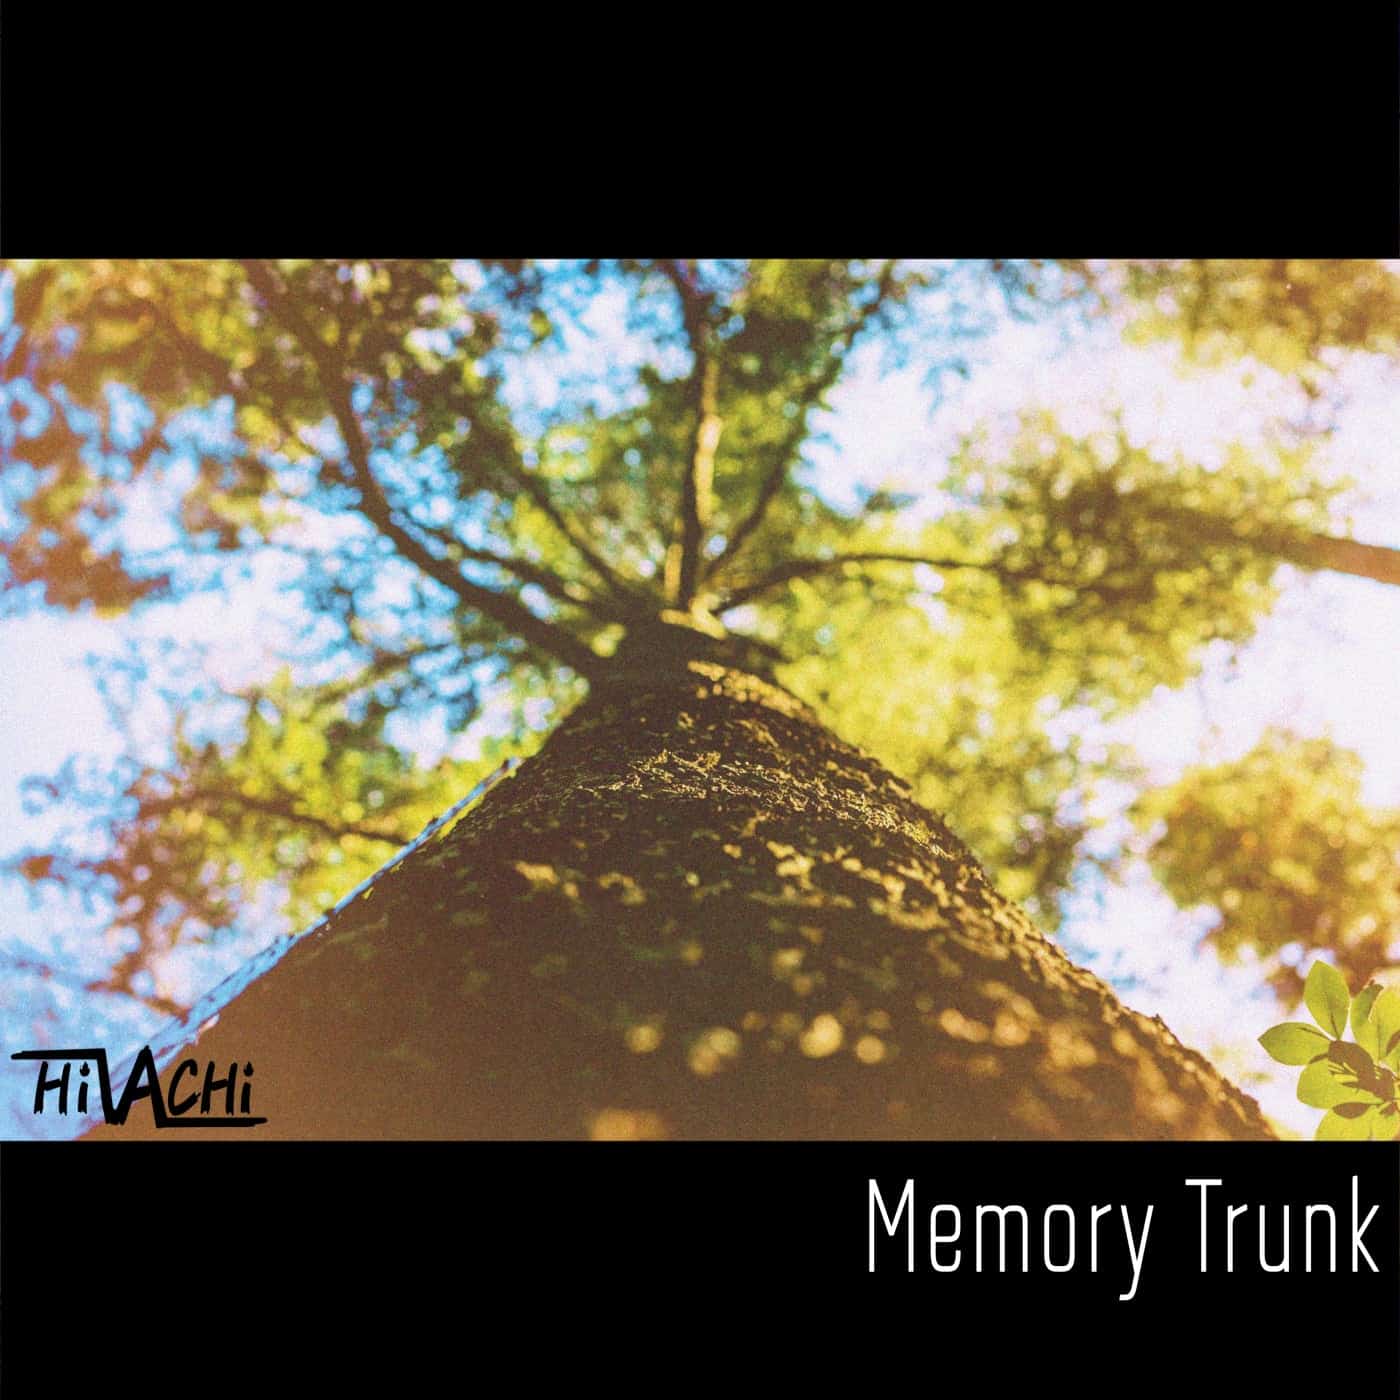 HiVACHi released new single album “Memory Trunk” from Force Energy Records